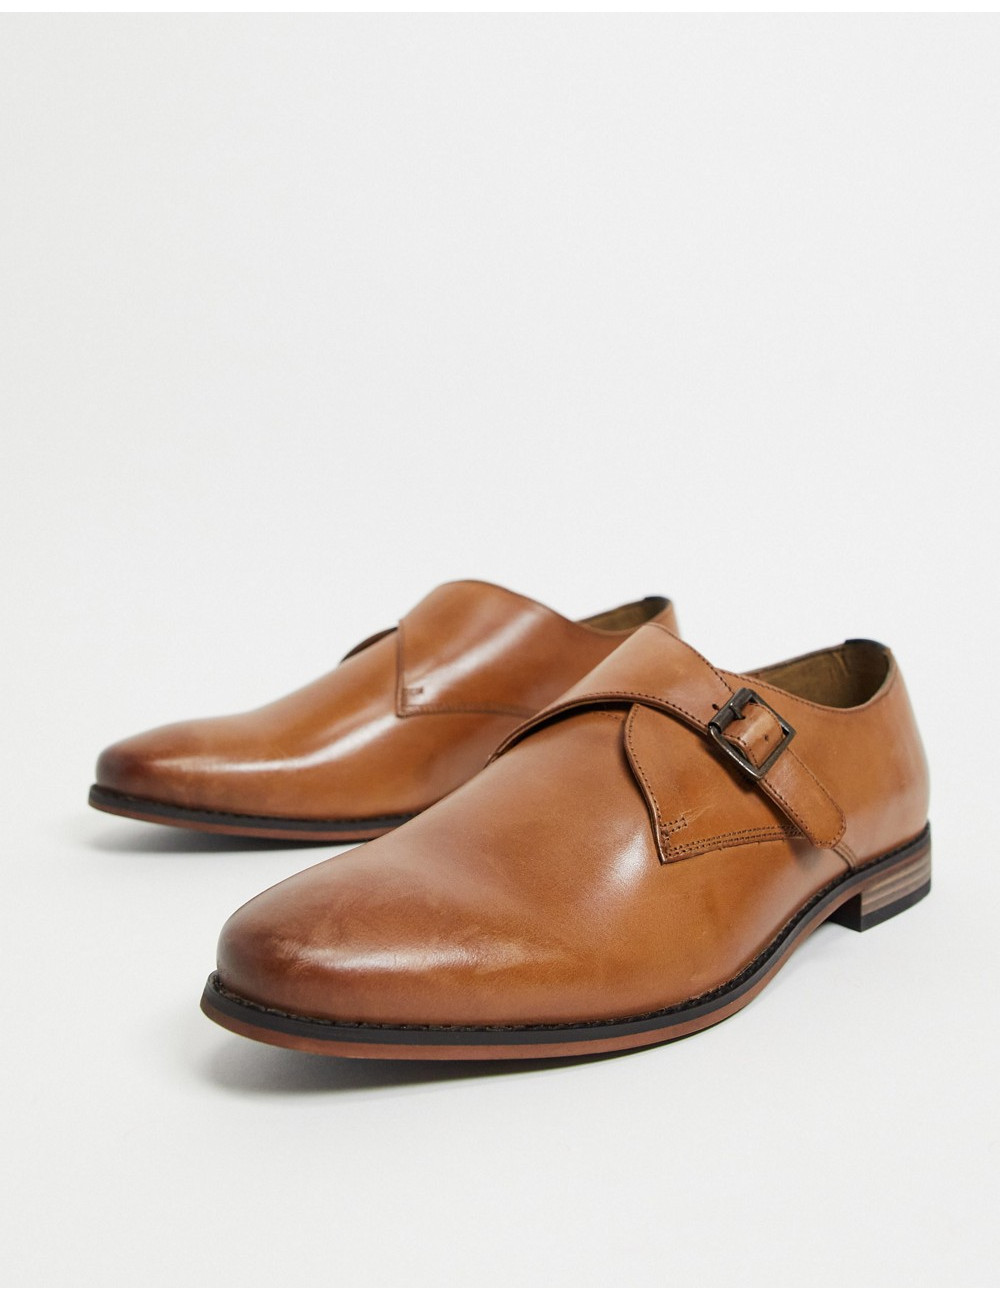 River Island brogues with...